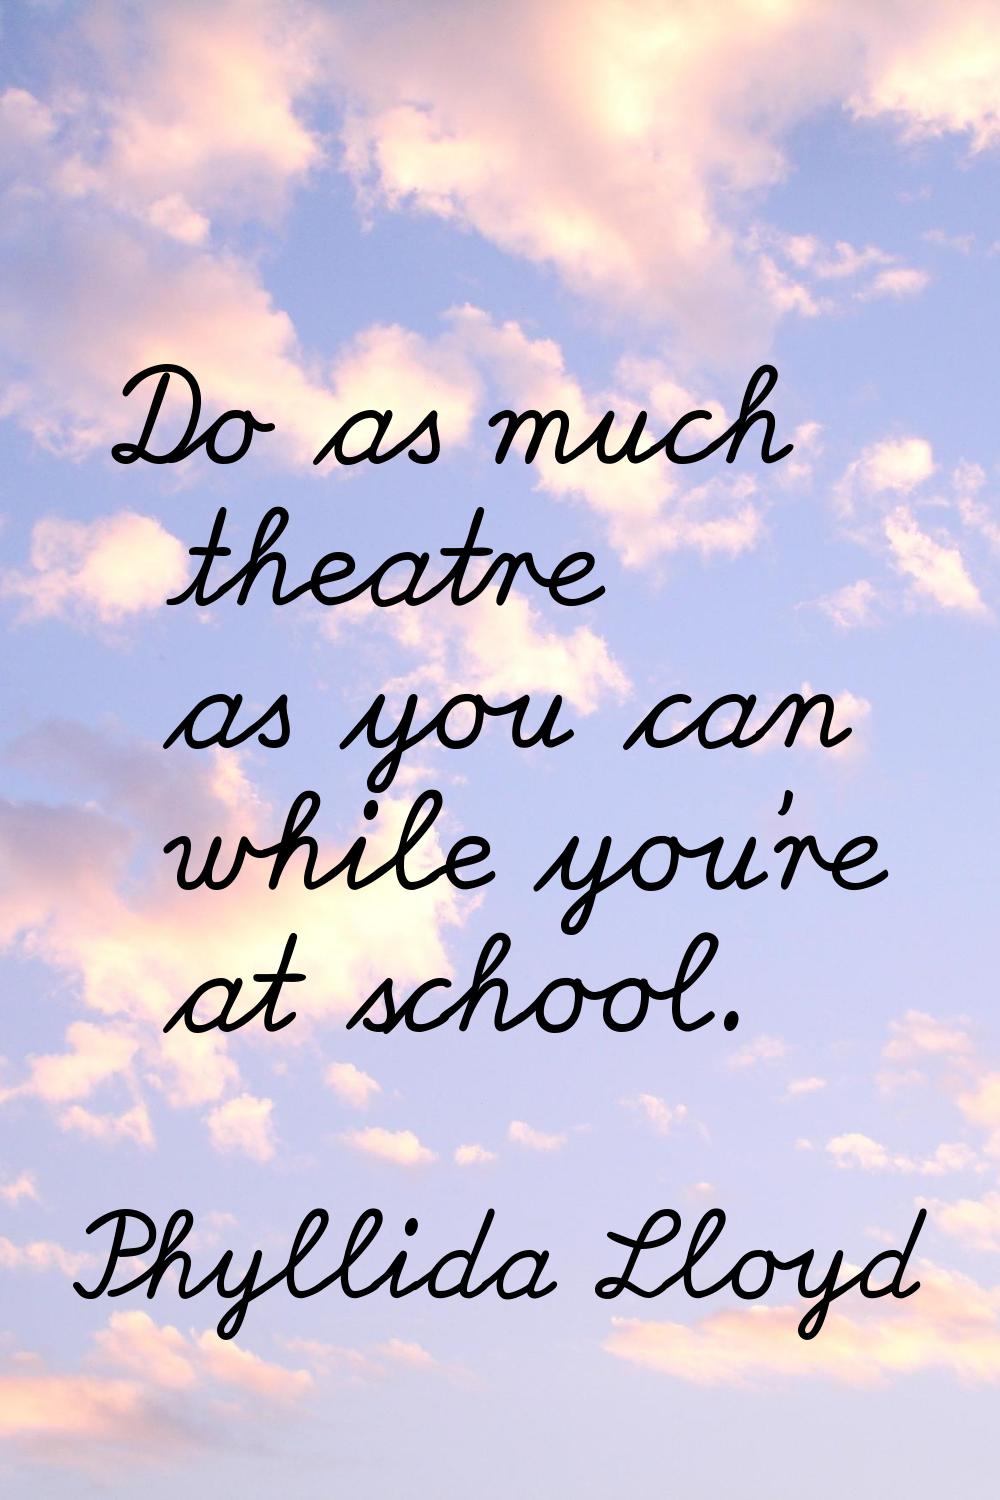 Do as much theatre as you can while you're at school.